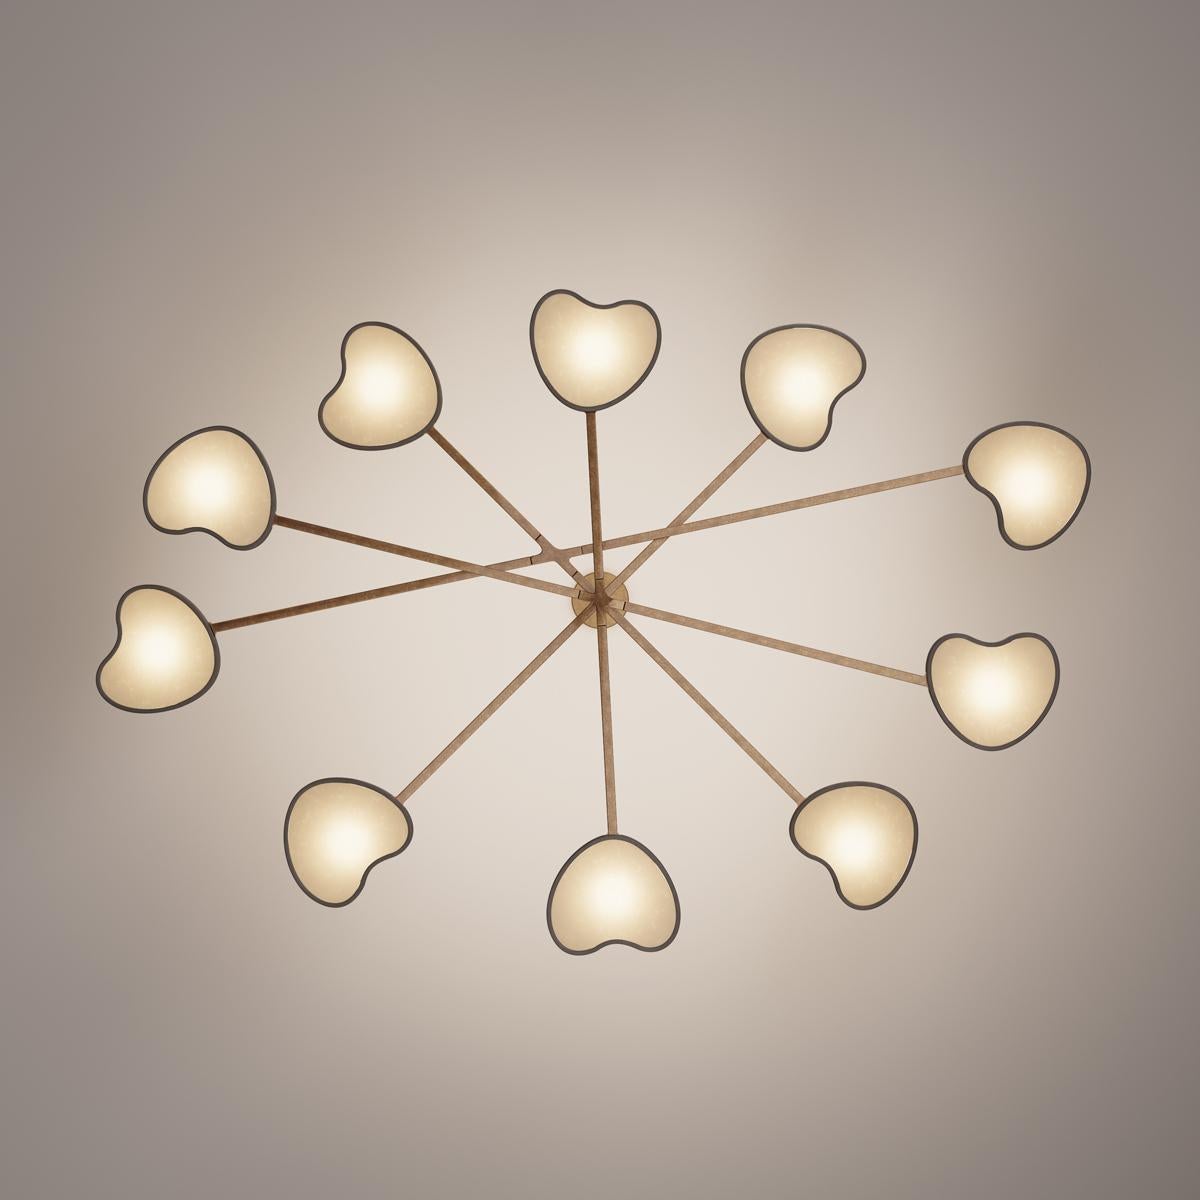 Italian Cuore N.10 Ceiling Light by Gaspare Asaro. Peltro and Bronze Finish For Sale